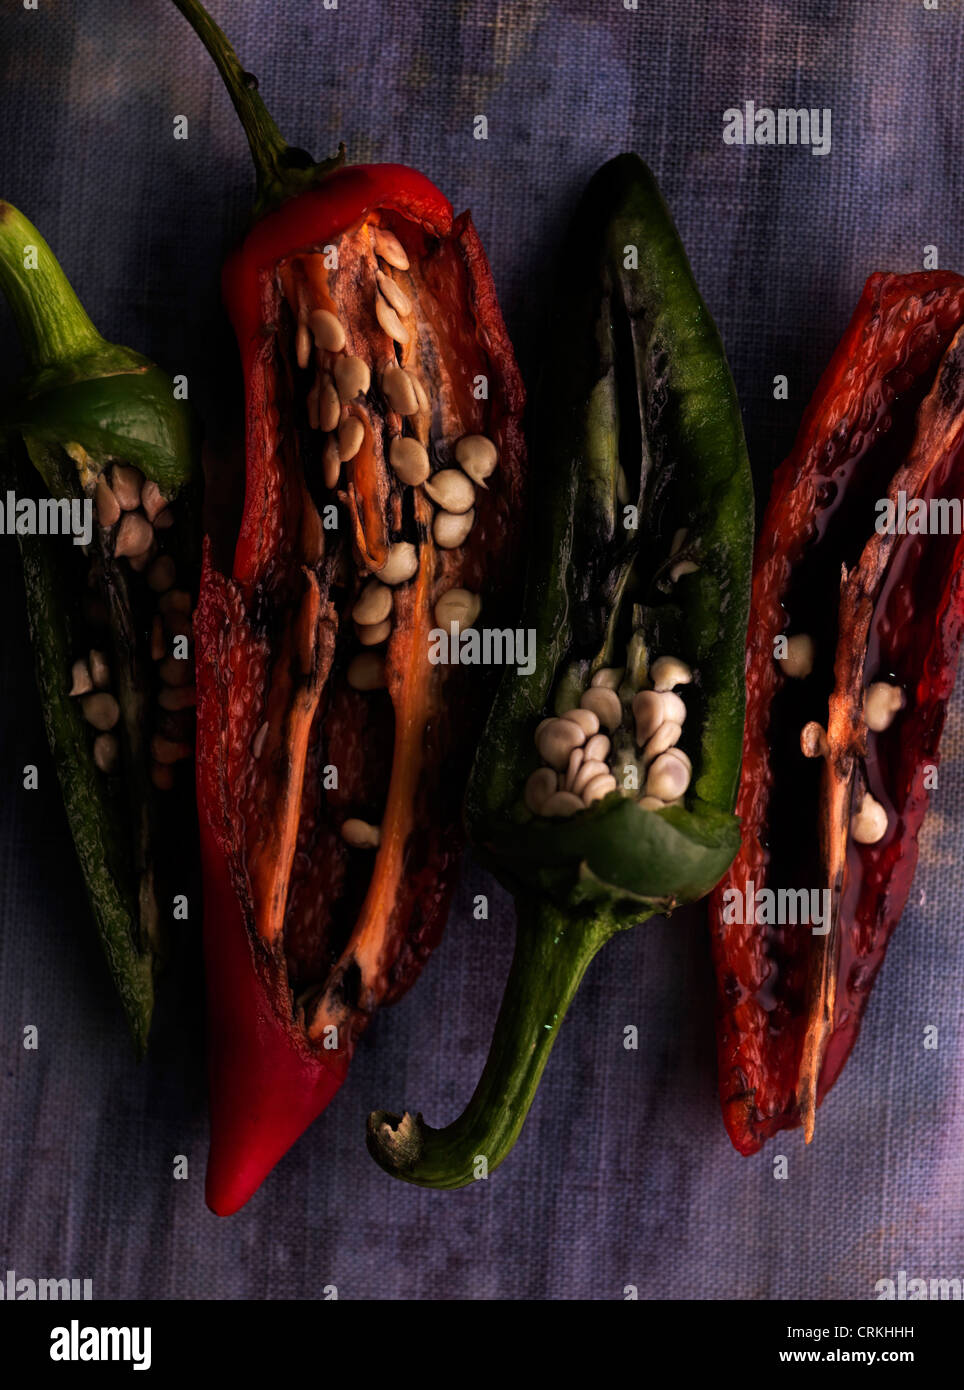 red and green sliced chilli peppers Stock Photo